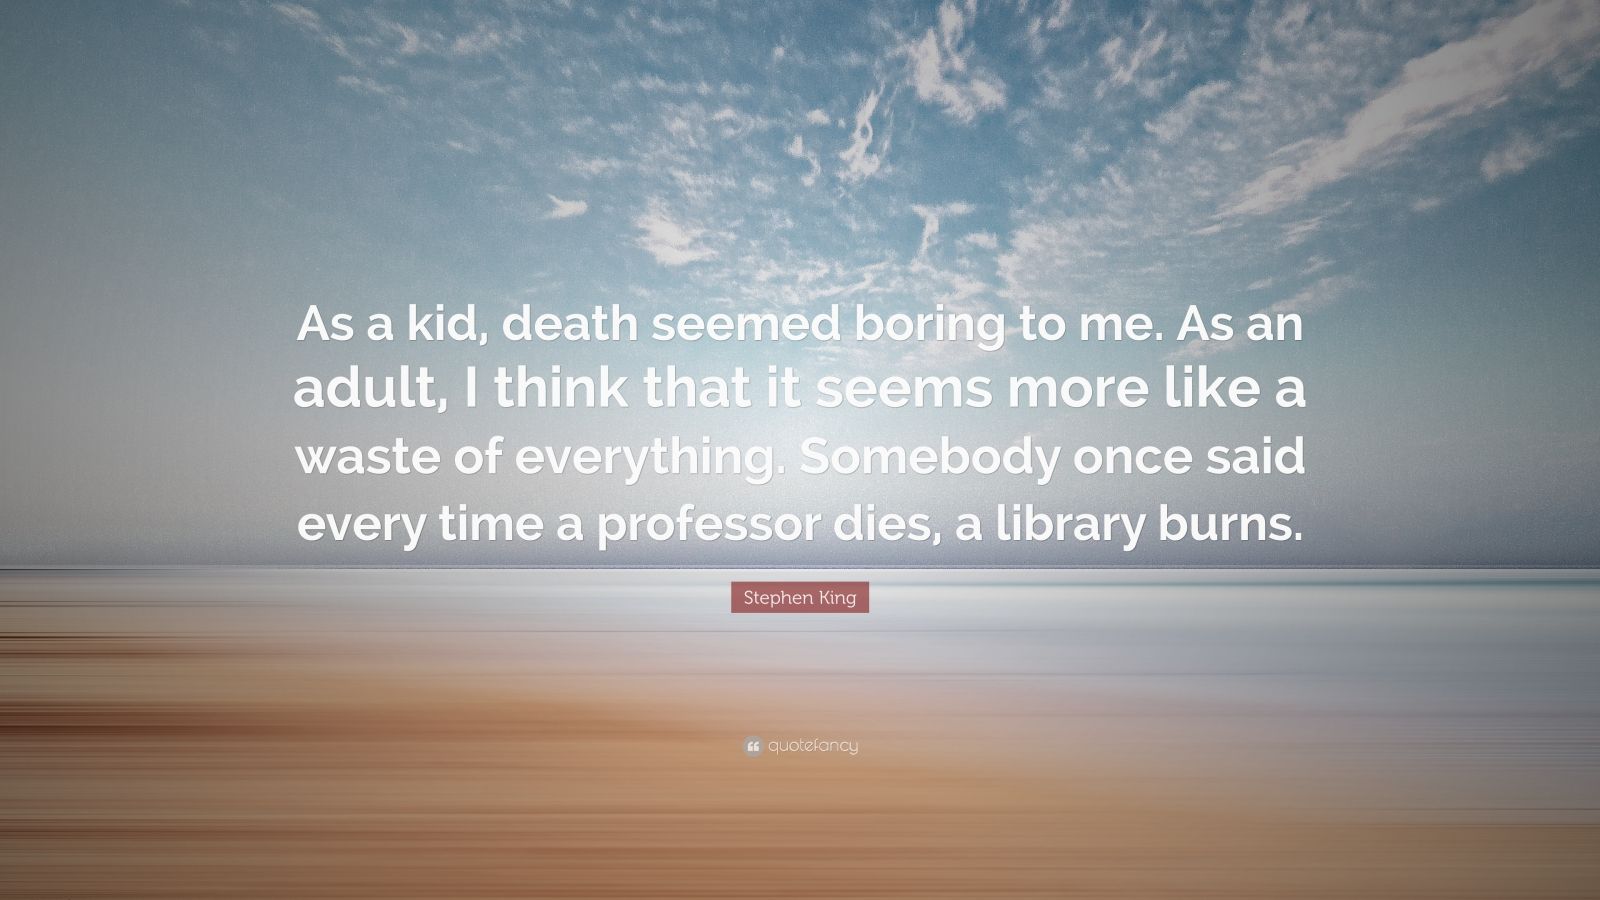 Stephen King Quote: "As a kid, death seemed boring to me. As an adult, I think that it seems ...